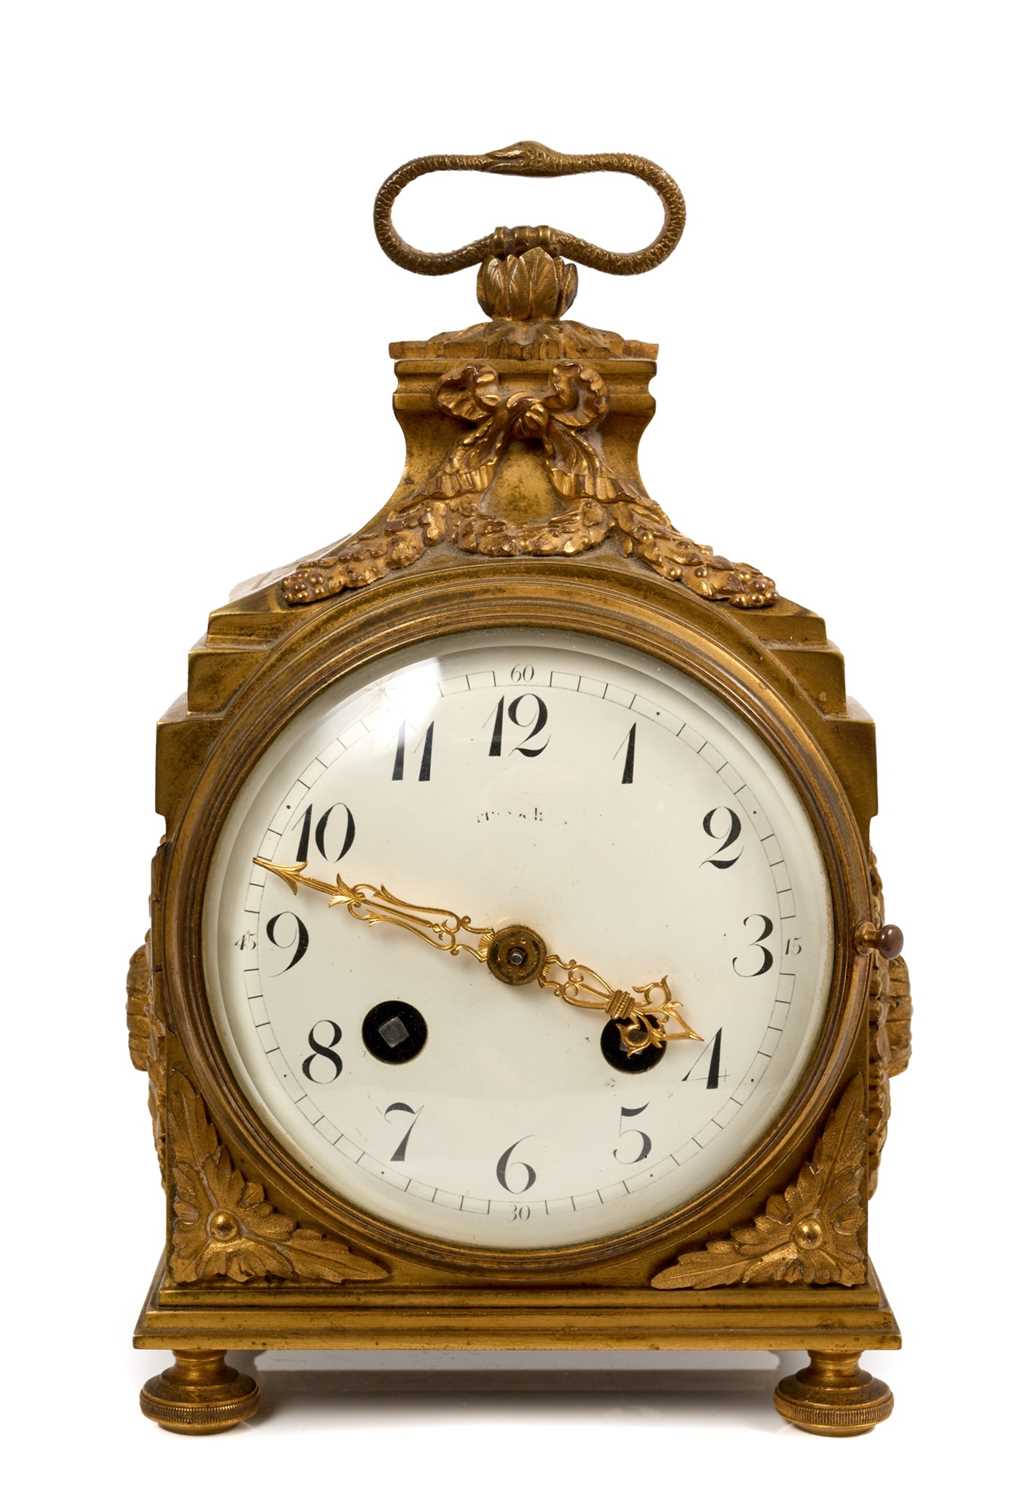 Early 20th century French ormolu Pendule d’Officer clock - Image 2 of 9